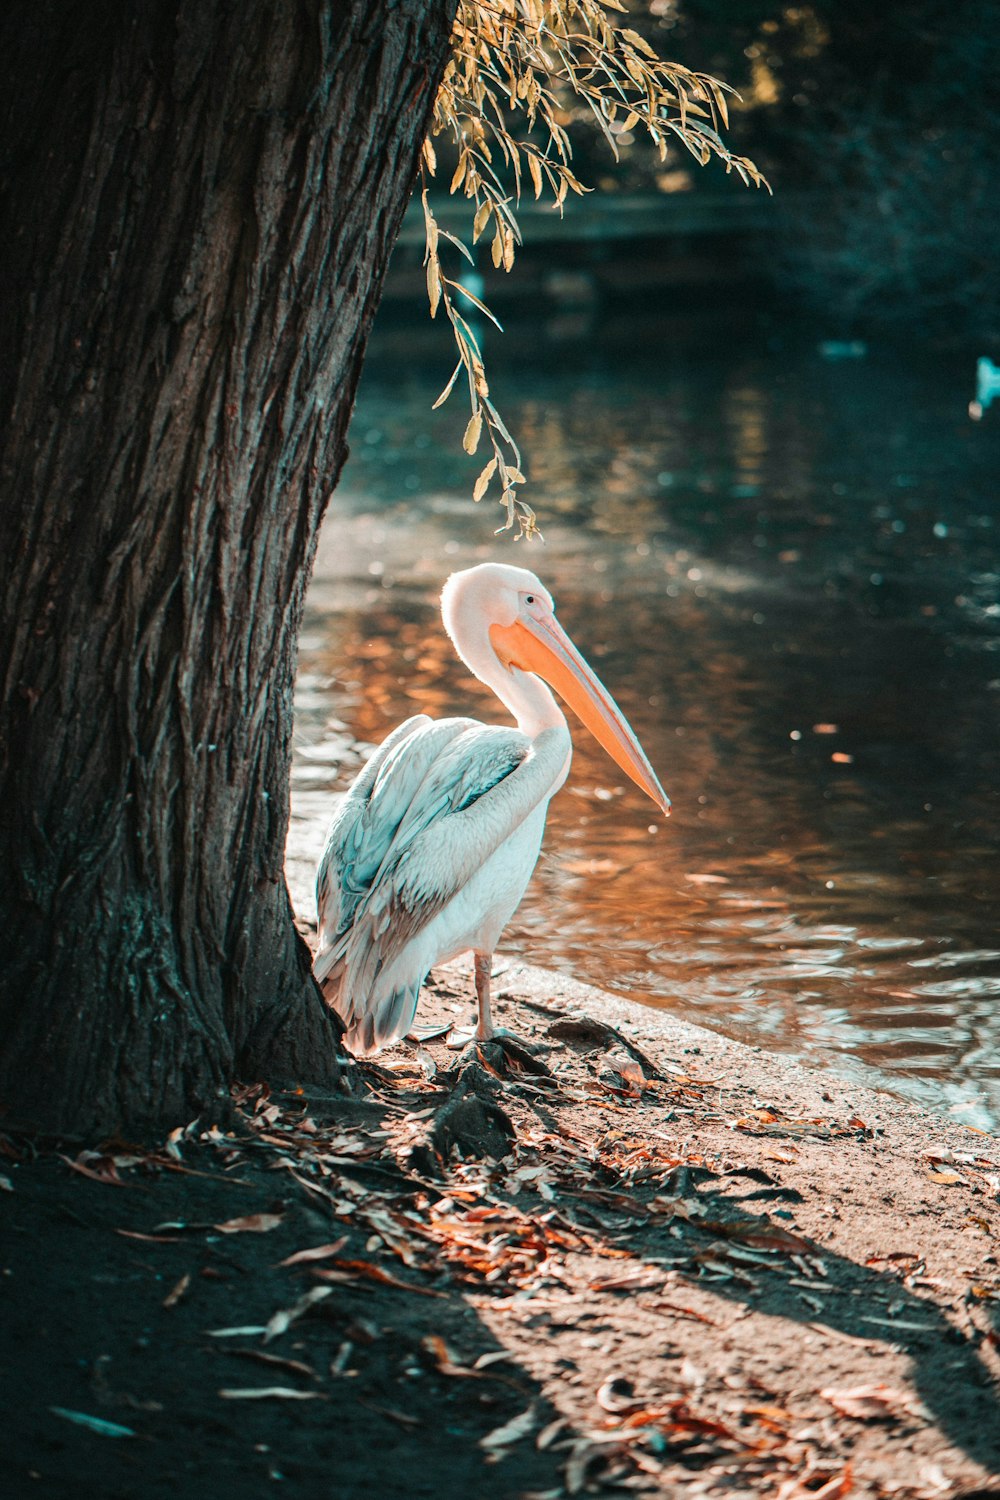 white pelican on brown tree trunk near body of water during daytime